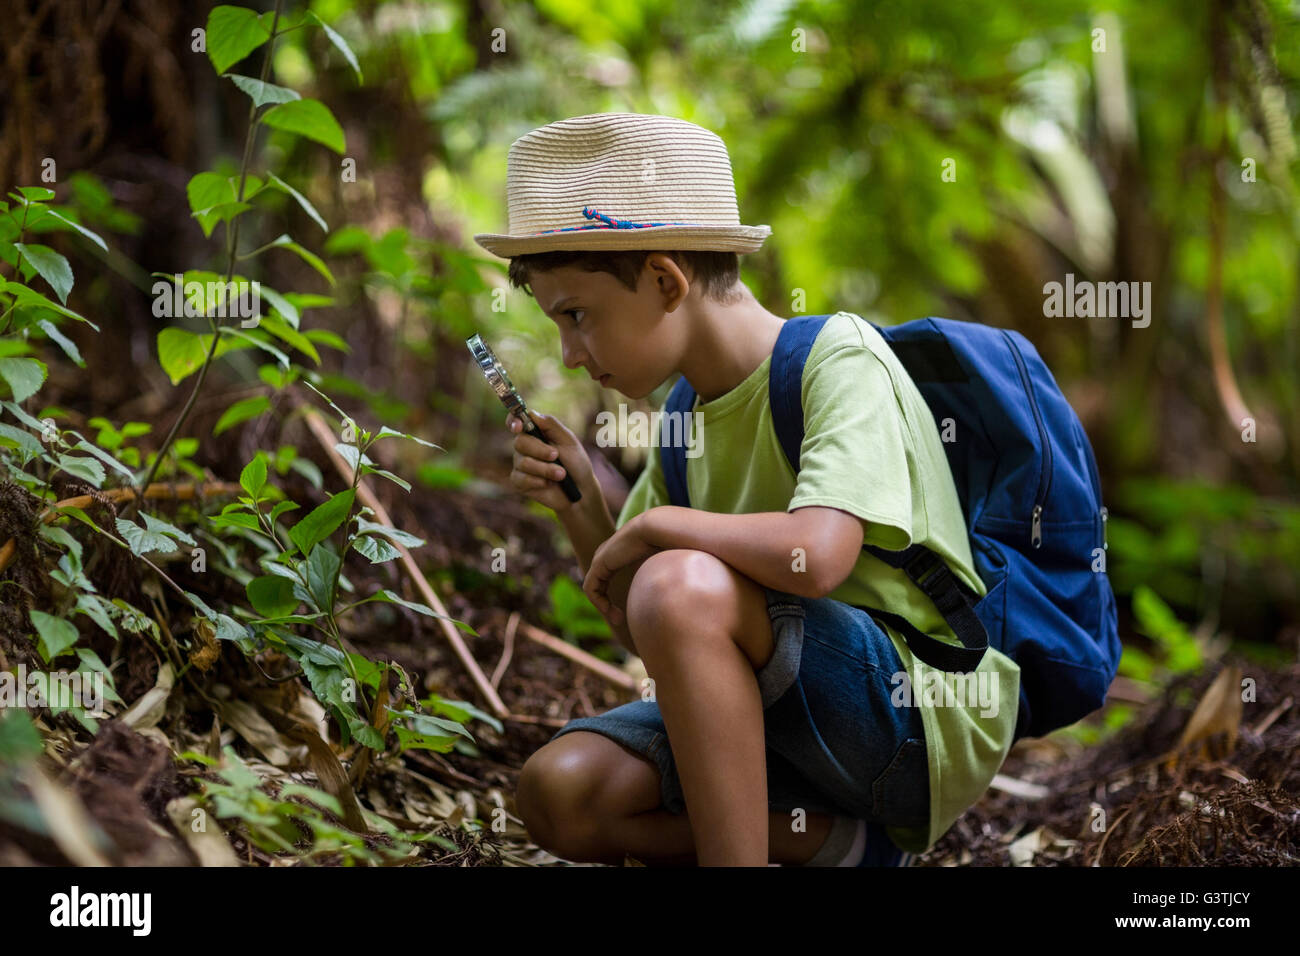 Boy examining the plants with magnifying glass Stock Photo